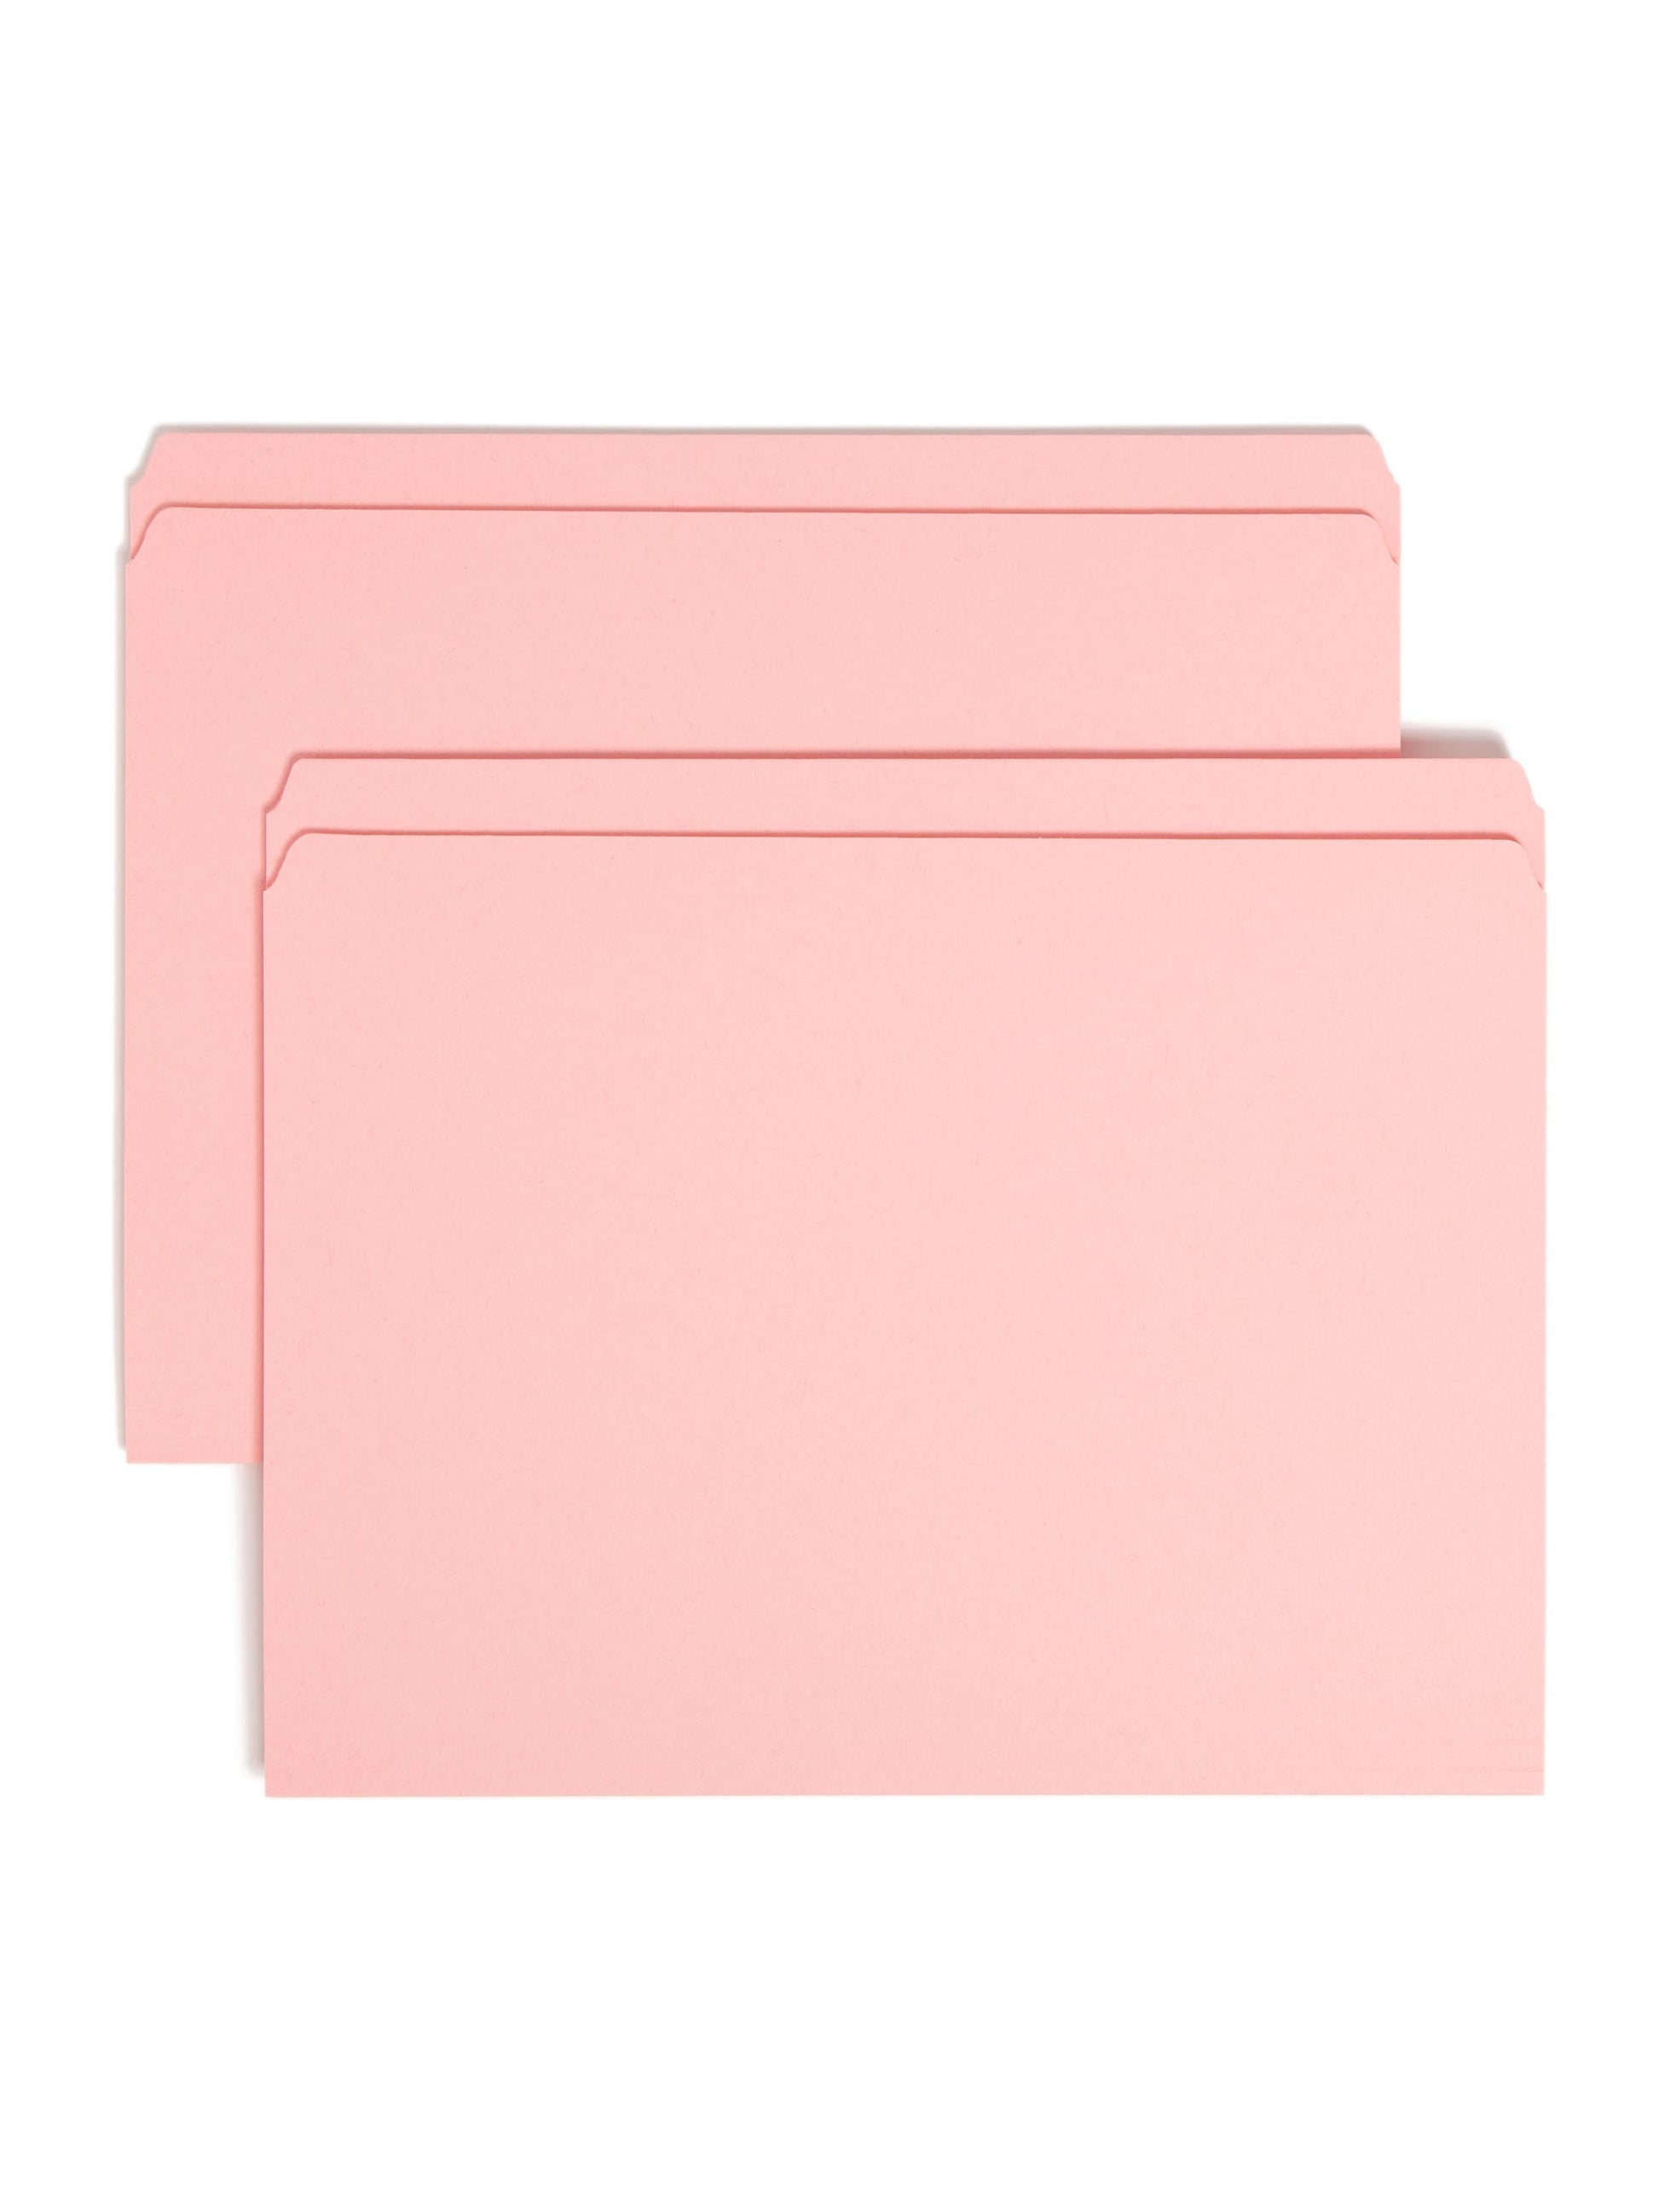 Reinforced Tab File Folders, Straight-Cut Tab, Pink Color, Letter Size, Set of 100, 086486126106